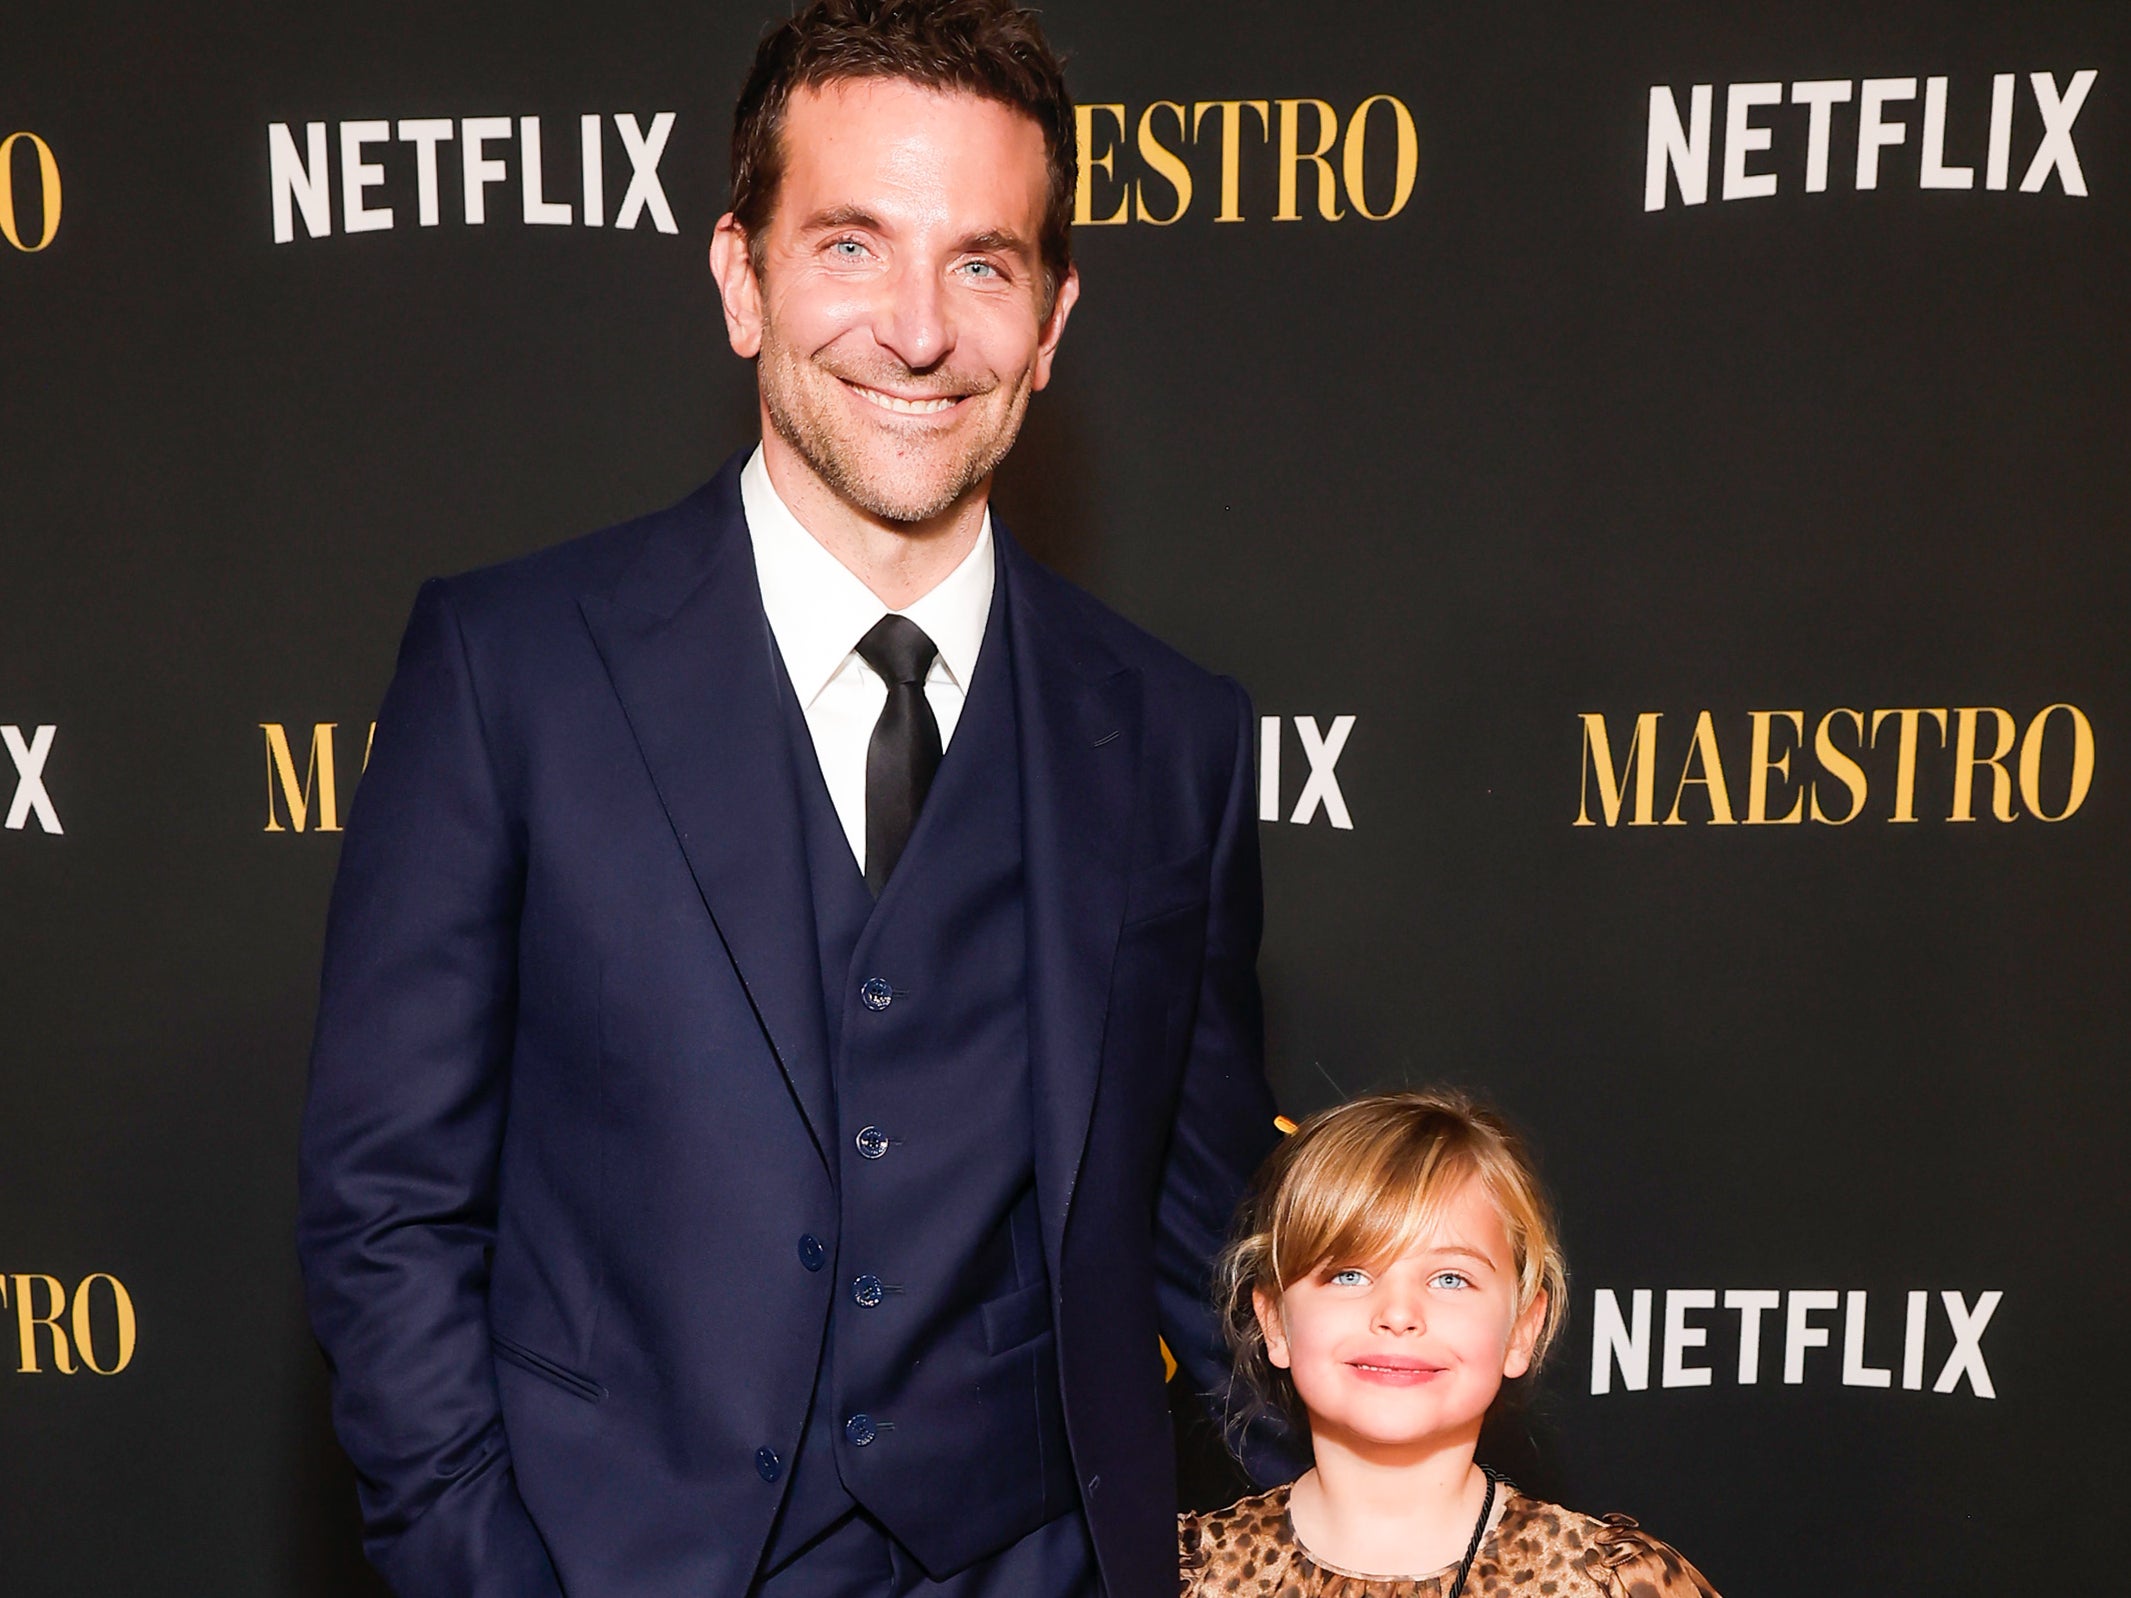 Bradley cooper with his daughter, six